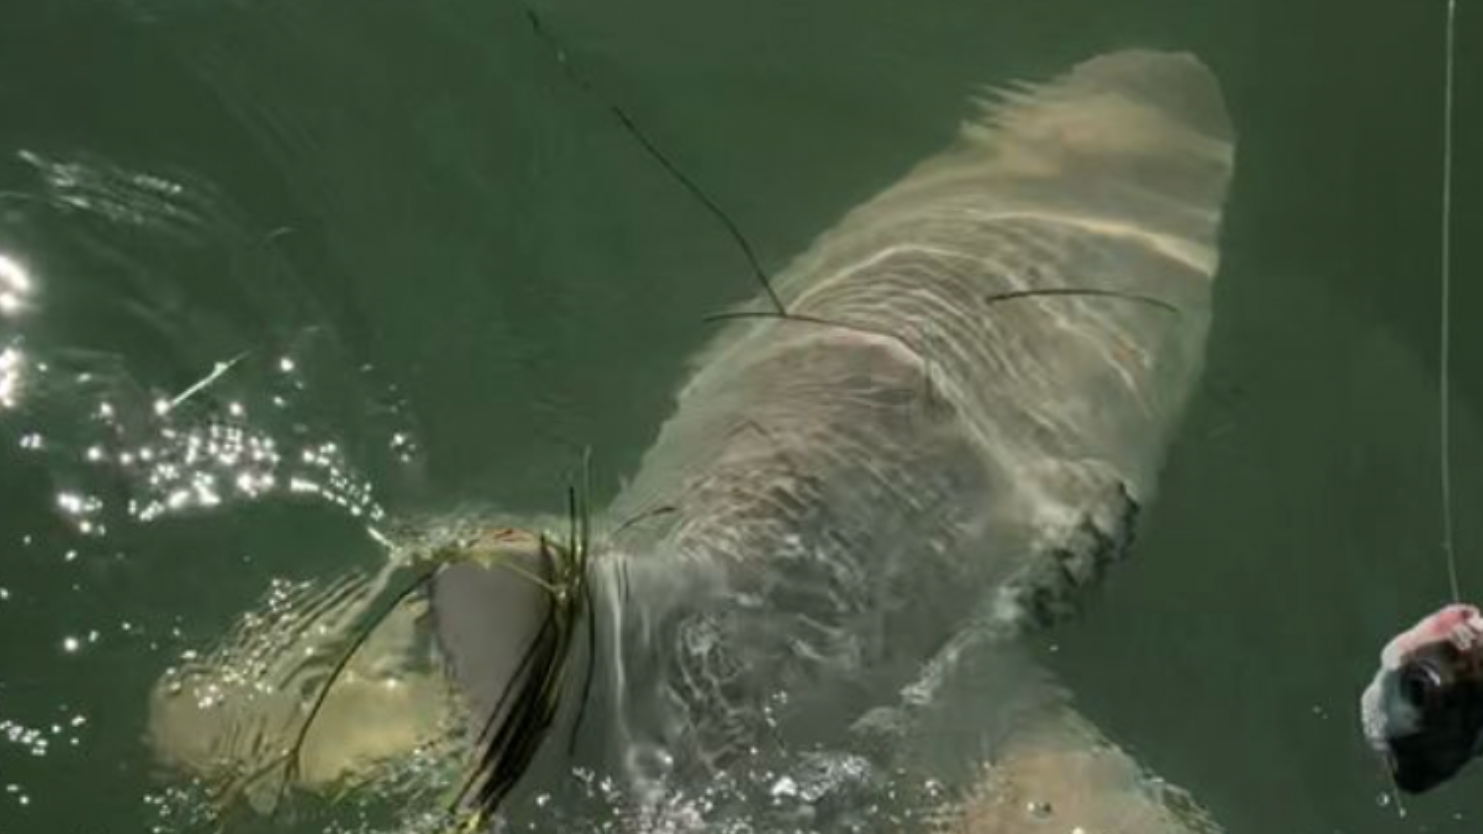 Bull Shark Trailing line from hook in mouth Our beautiful pictures